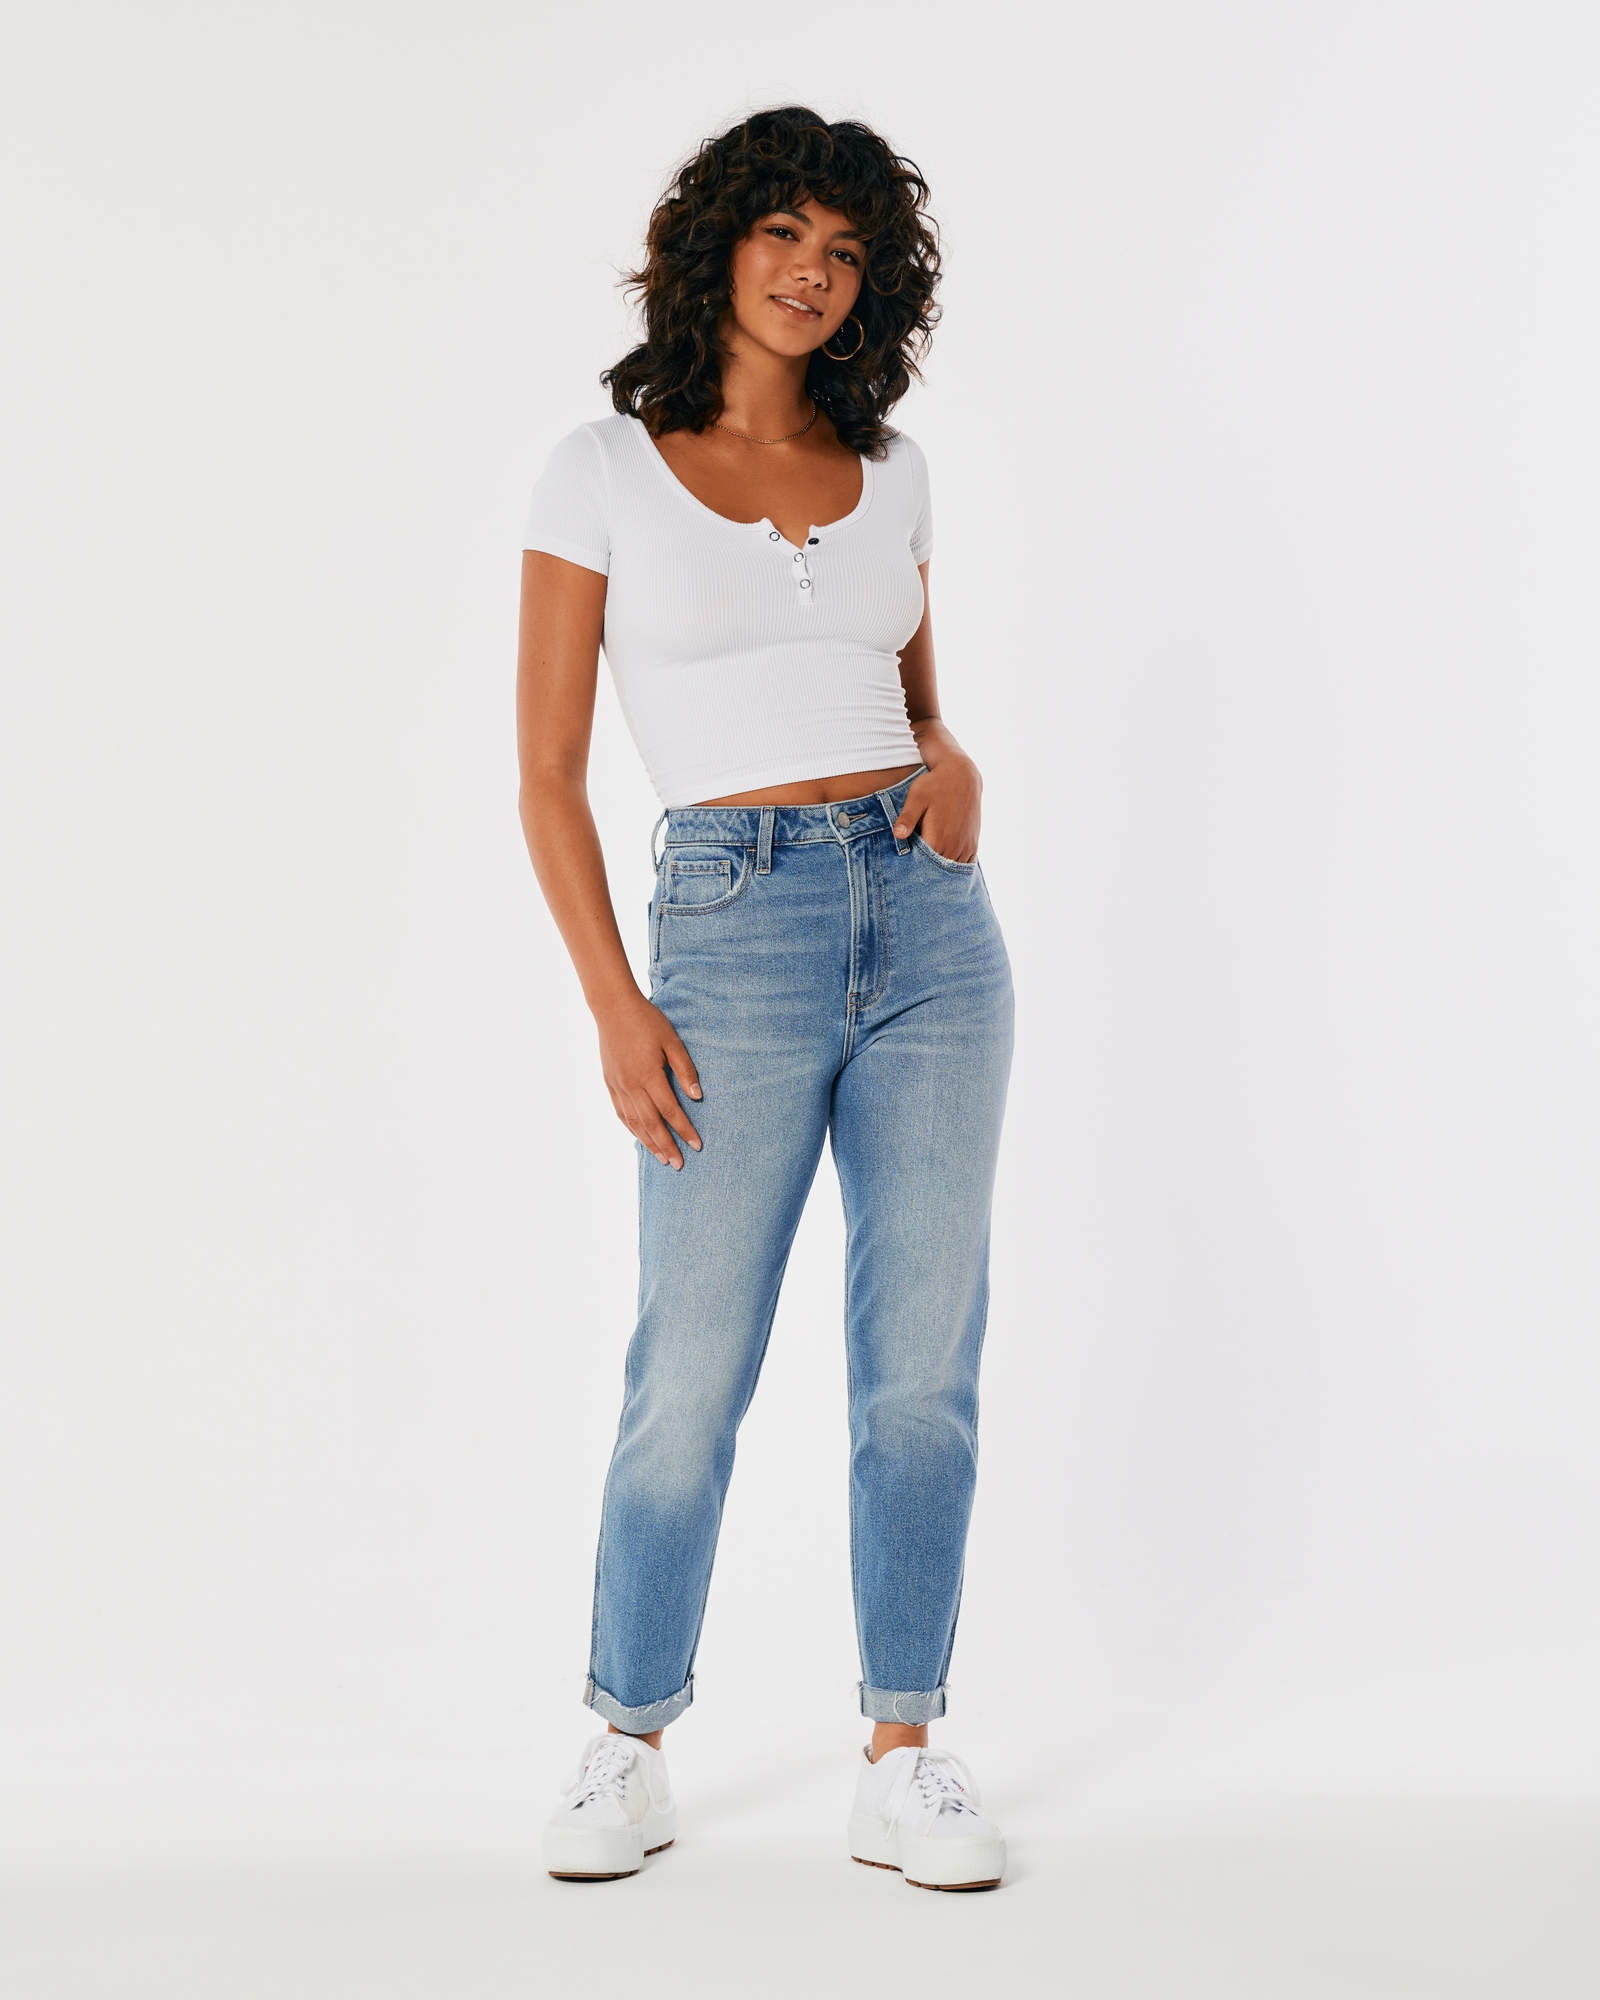 https://img.hollisterco.com/is/image/anf/KIC_355-2101-6325-278_model1.jpg?policy=product-extra-large